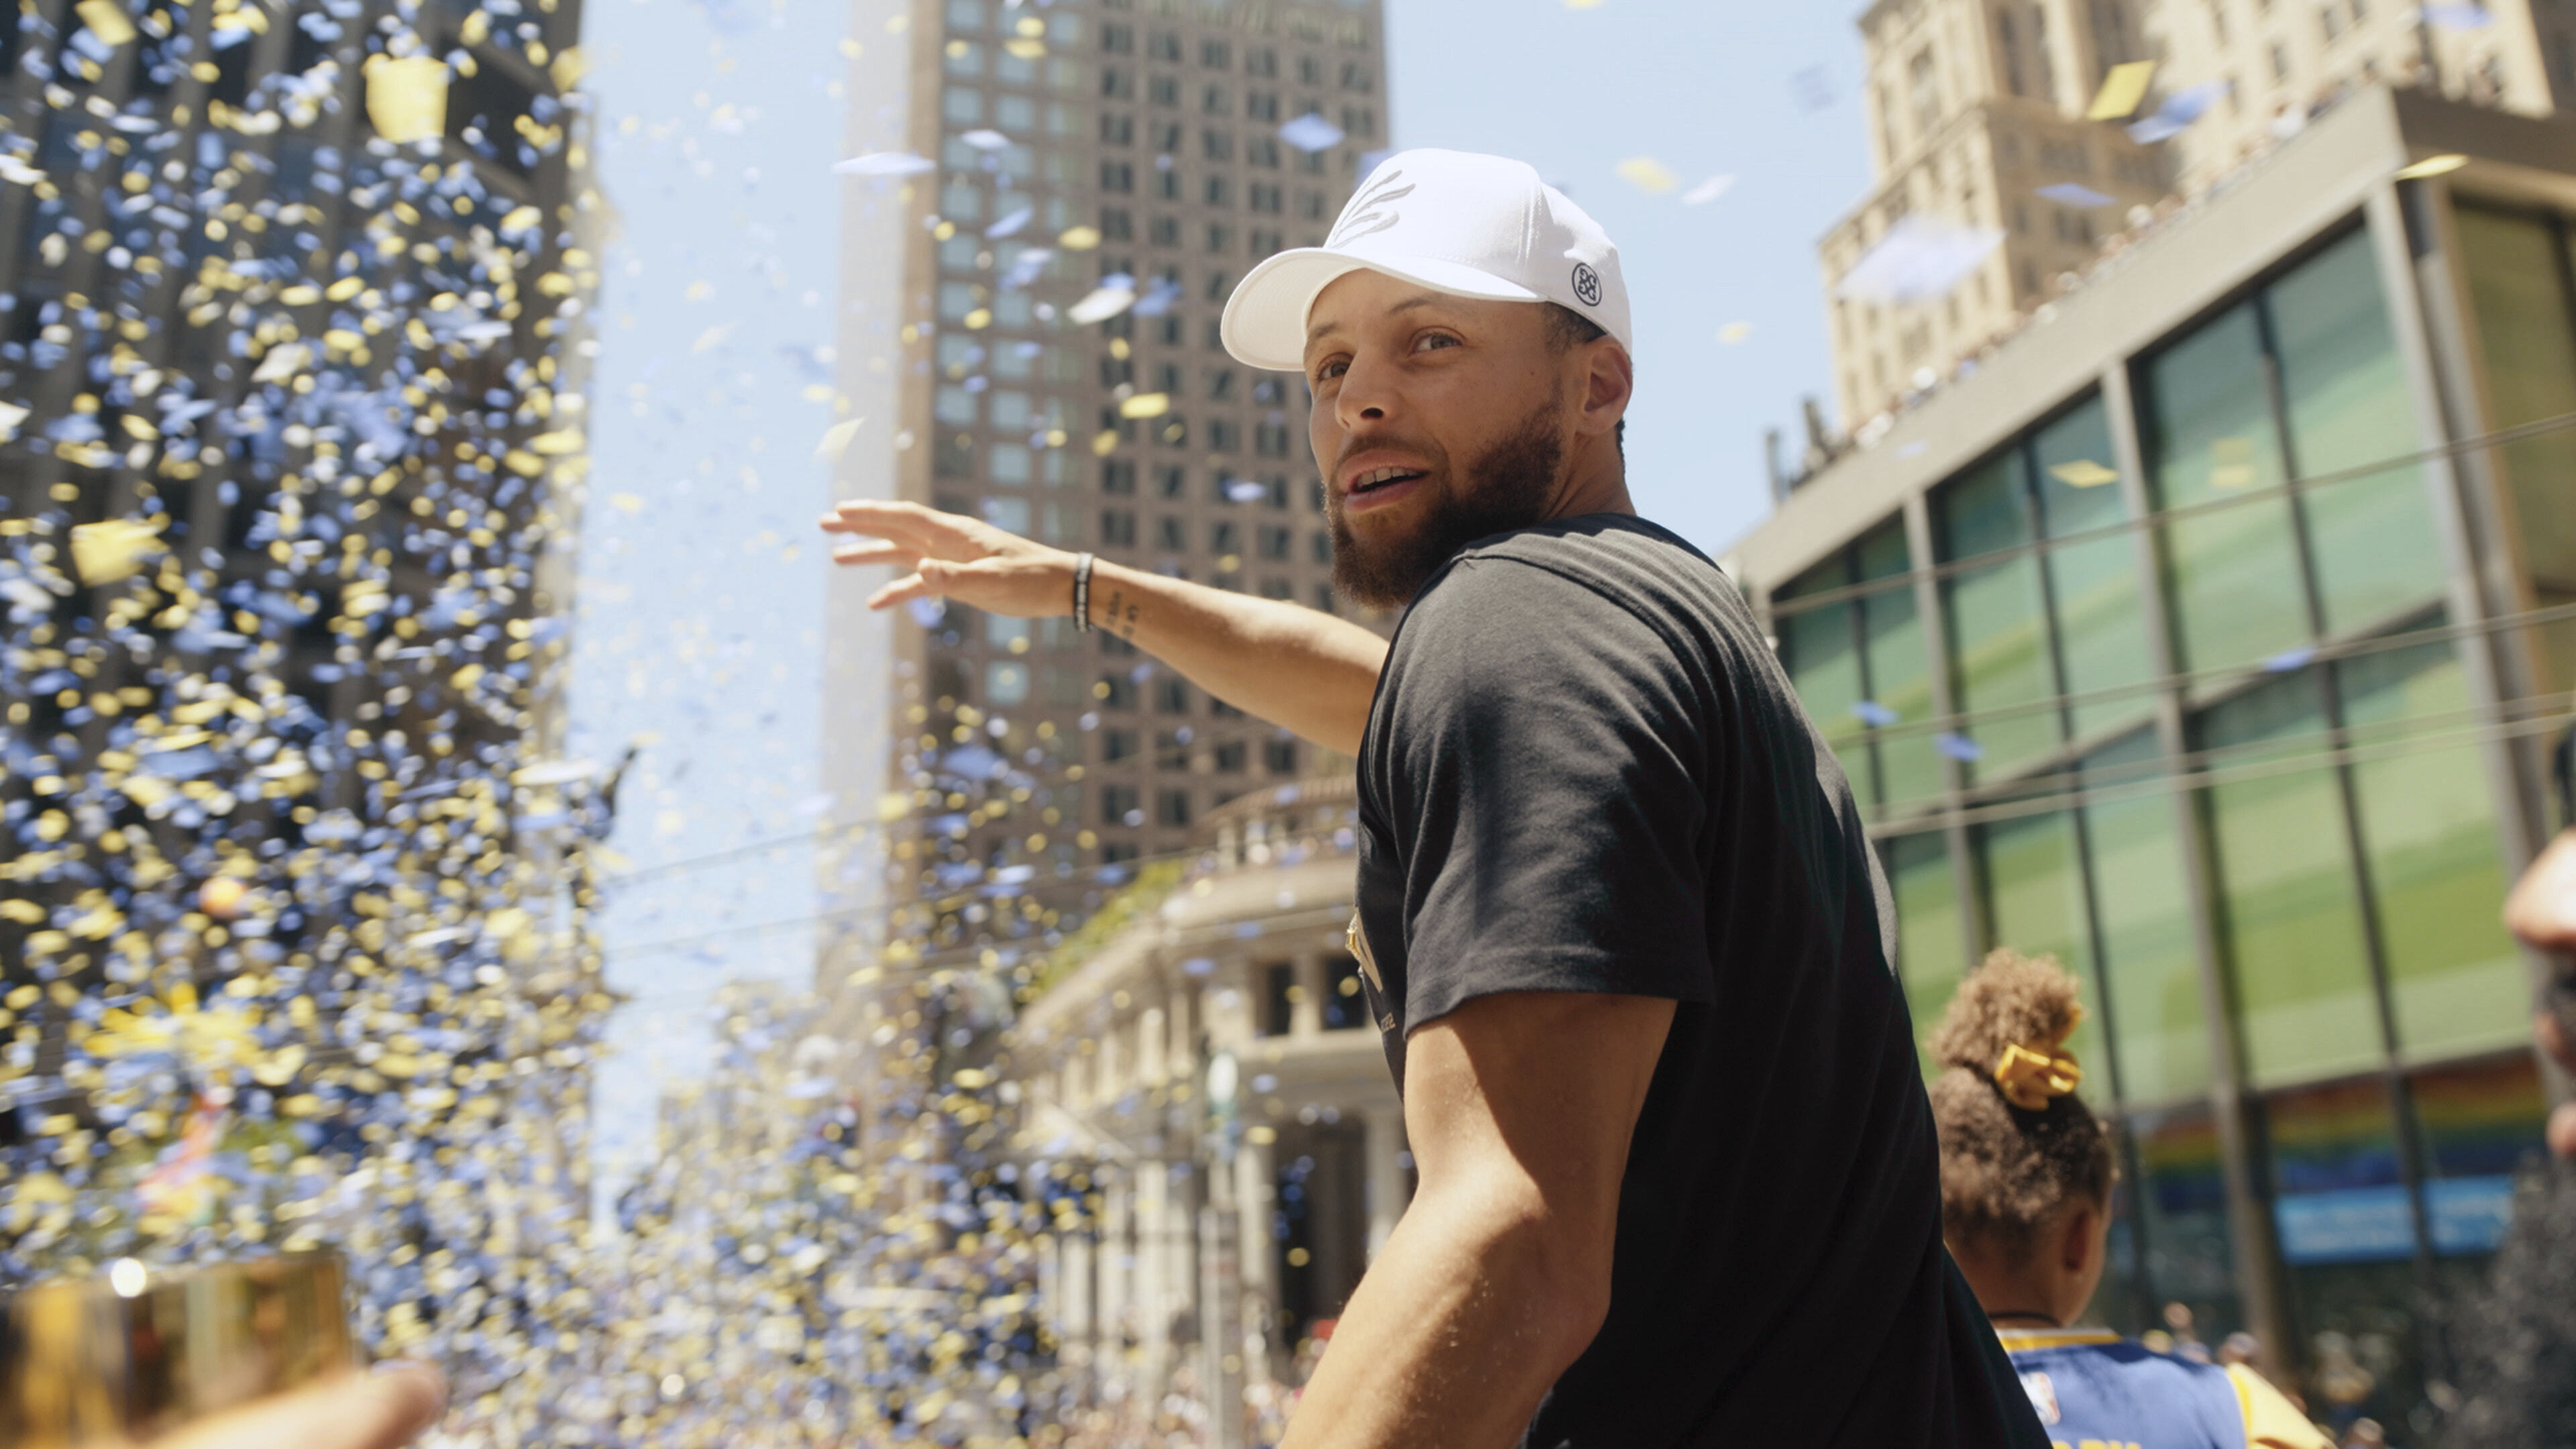 Stephen Curry Touts ‘Underrated’ Mindset in New Documentary